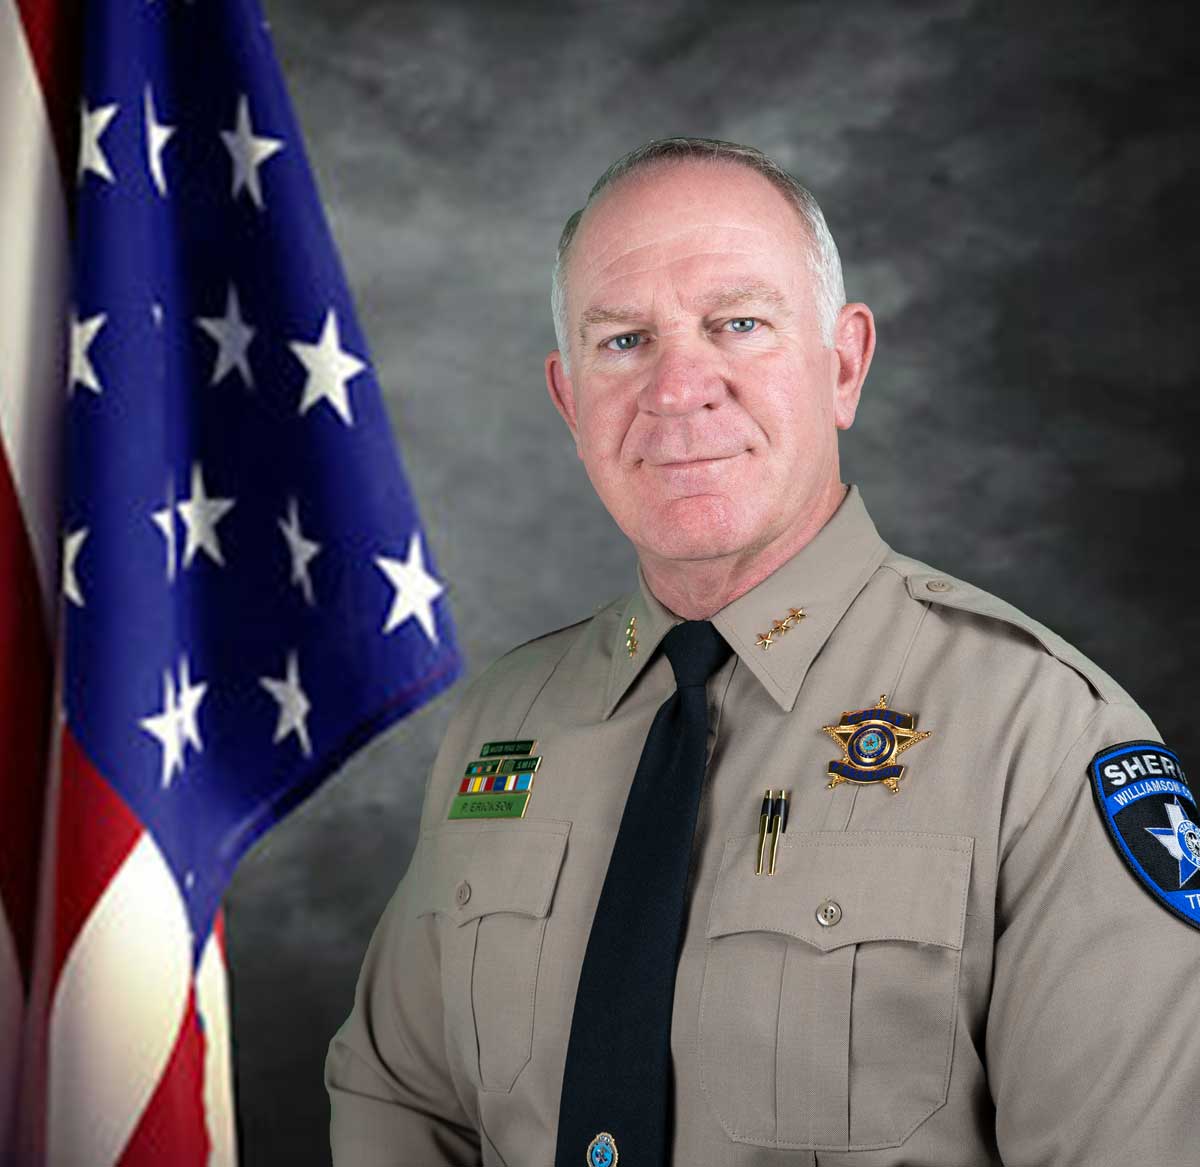 Chief Deputy Patrick Erickson standing next to an American Flag on a textured grey background